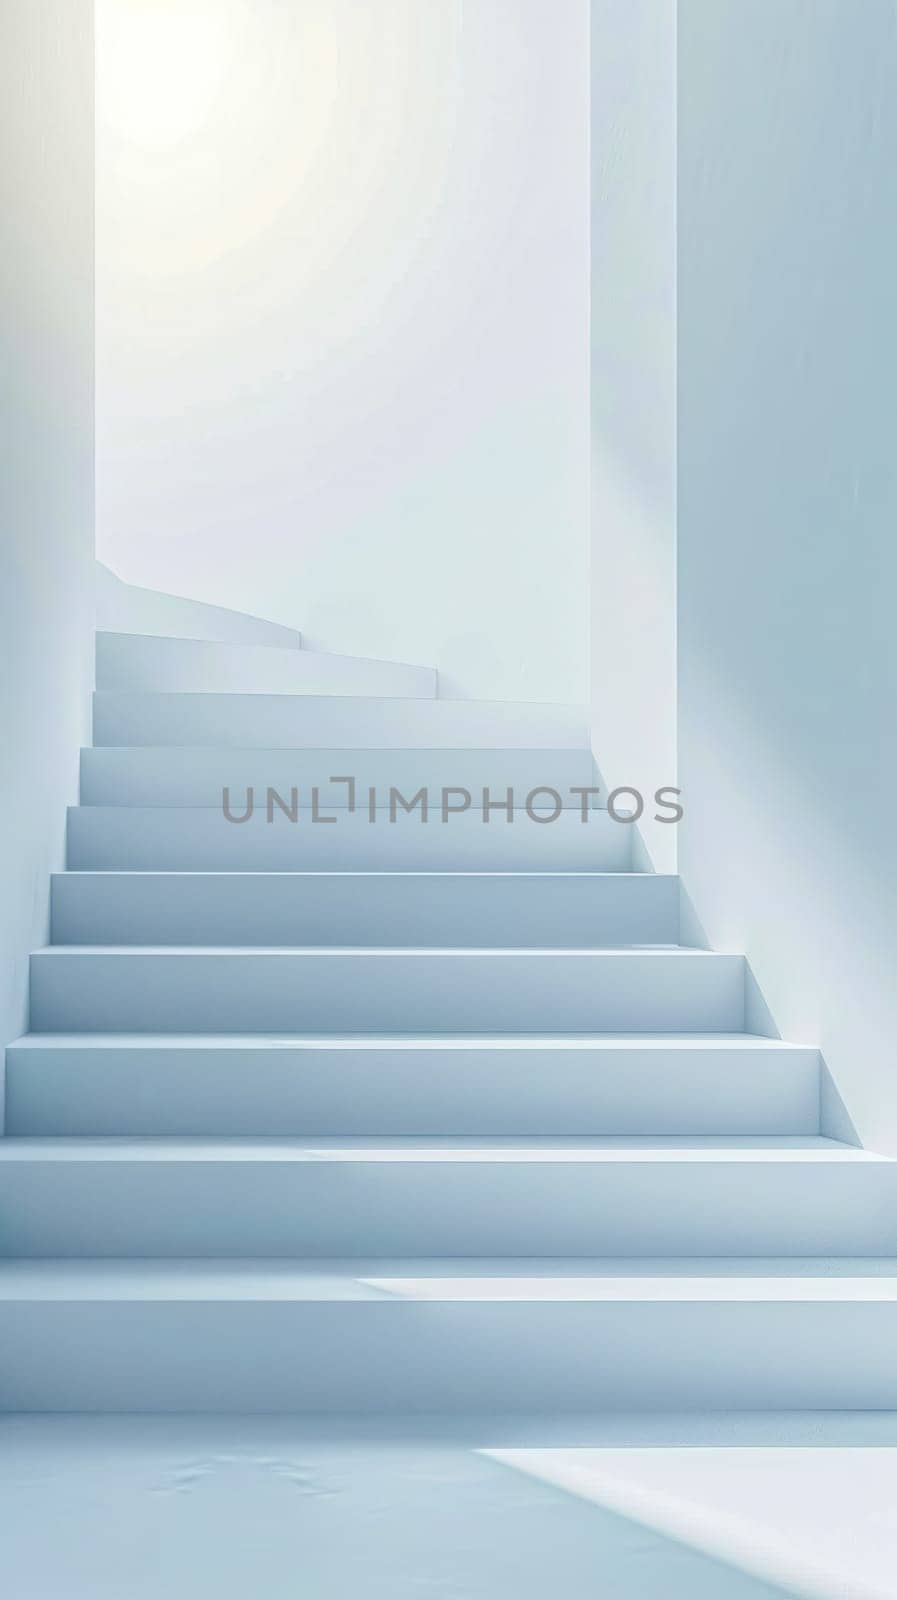 white staircase ascending towards a bright light, symbolizing progress, growth, and the journey towards self-development or enlightenment by Edophoto